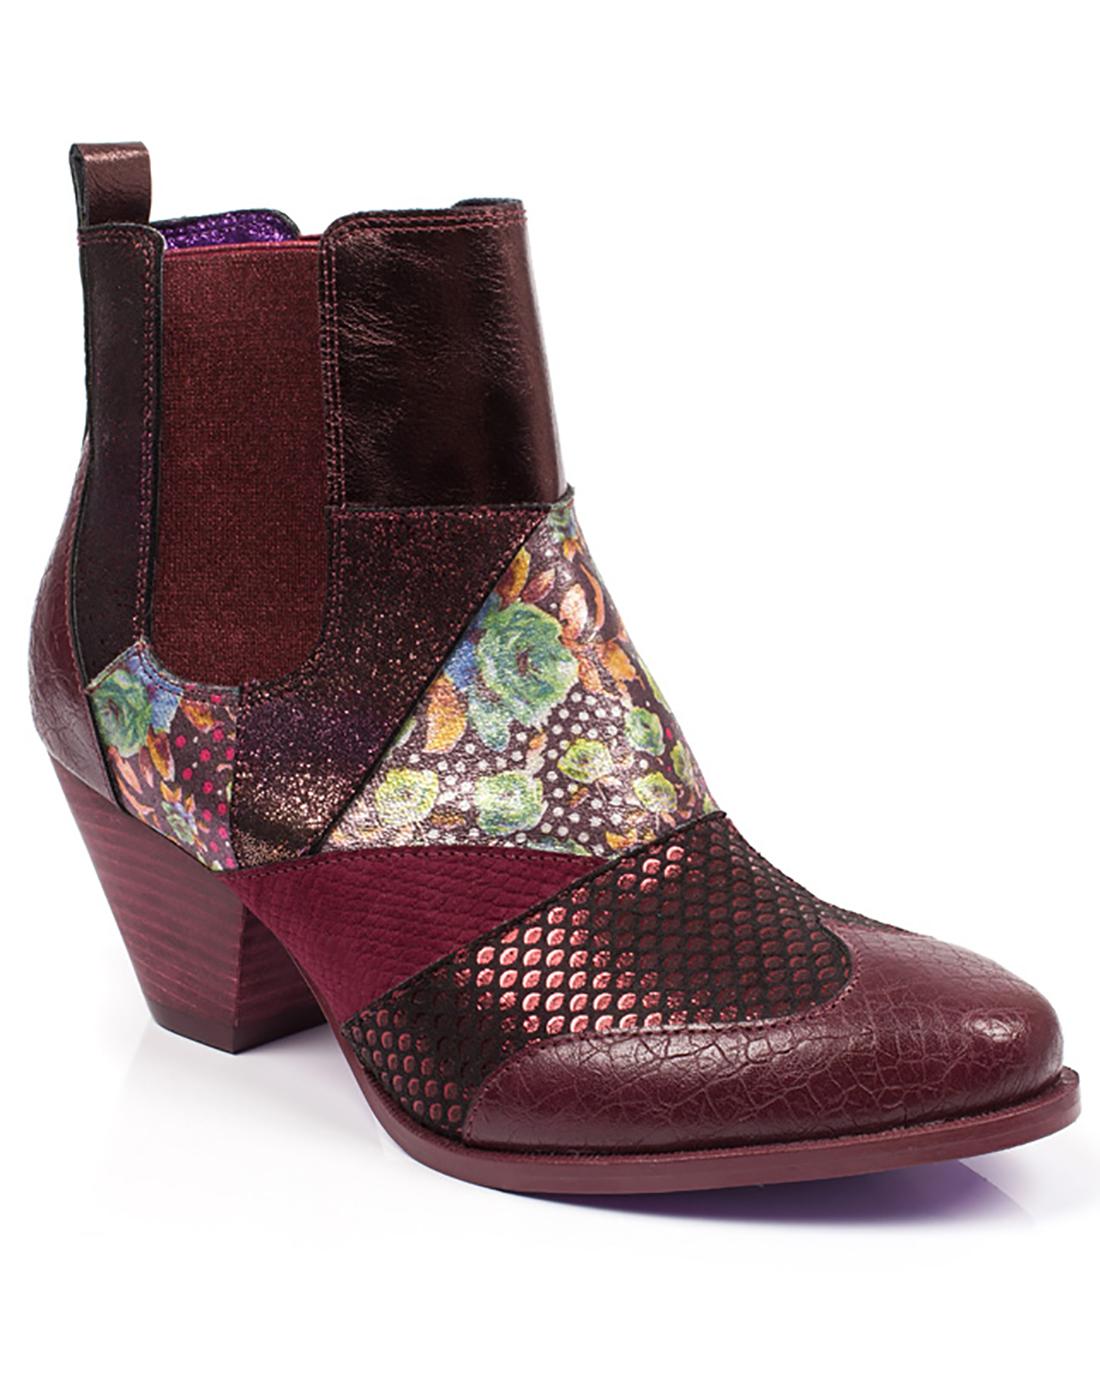 POETIC LICENCE Chelsea Patch Womens Mod Chelsea Boots in Burgundy